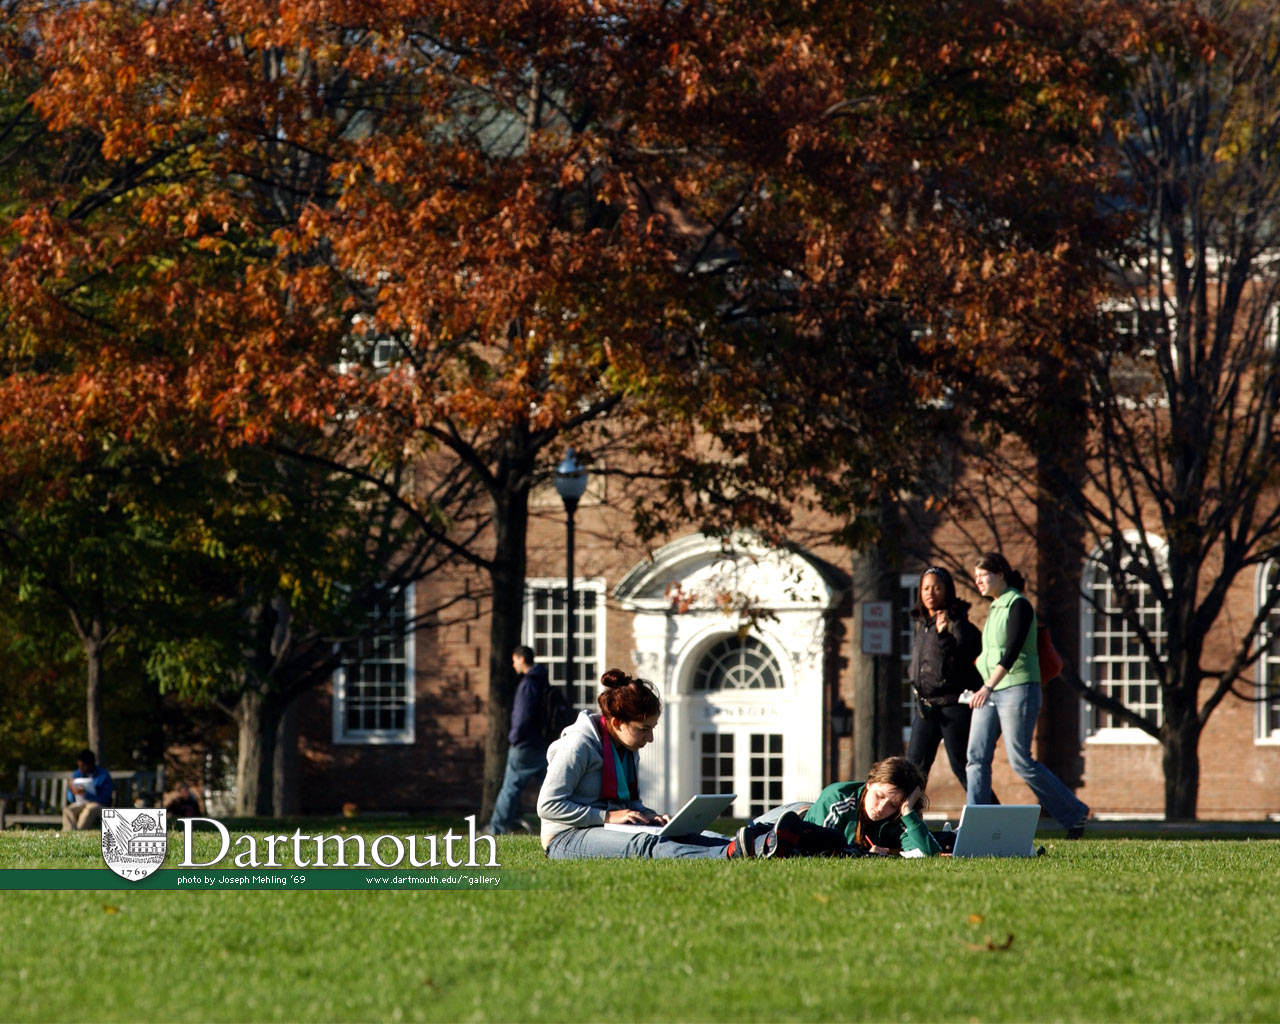 DARTMOUTH REFUSED To Let An Innocent Accused Professor Defend Himself Publicly. He Committed Suicide.